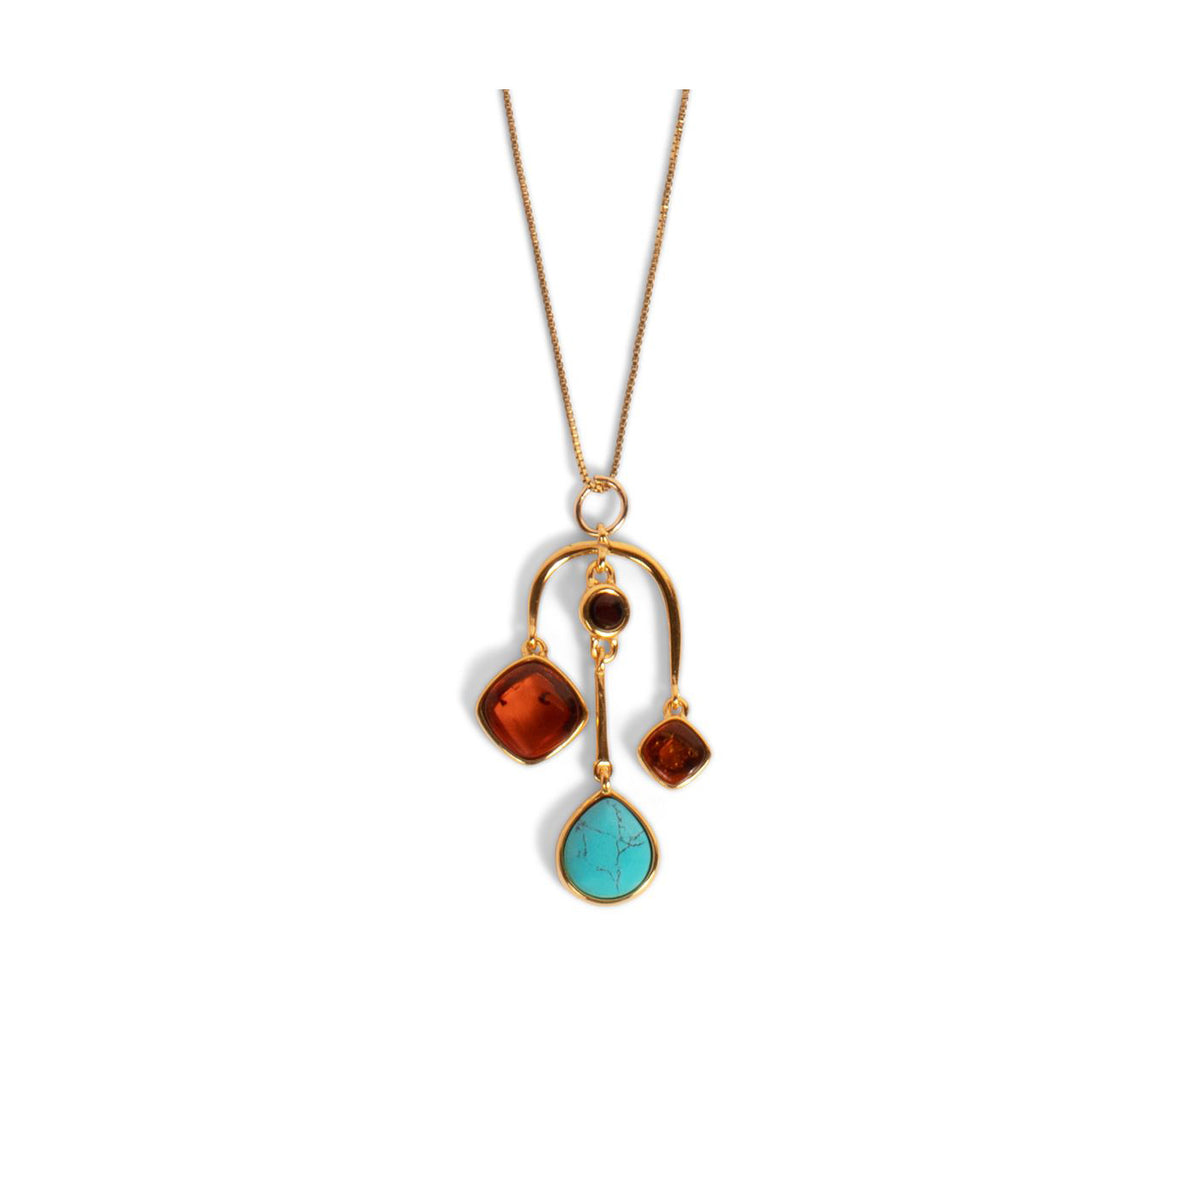 Turquoise and Amber Asymmetrical Pendant